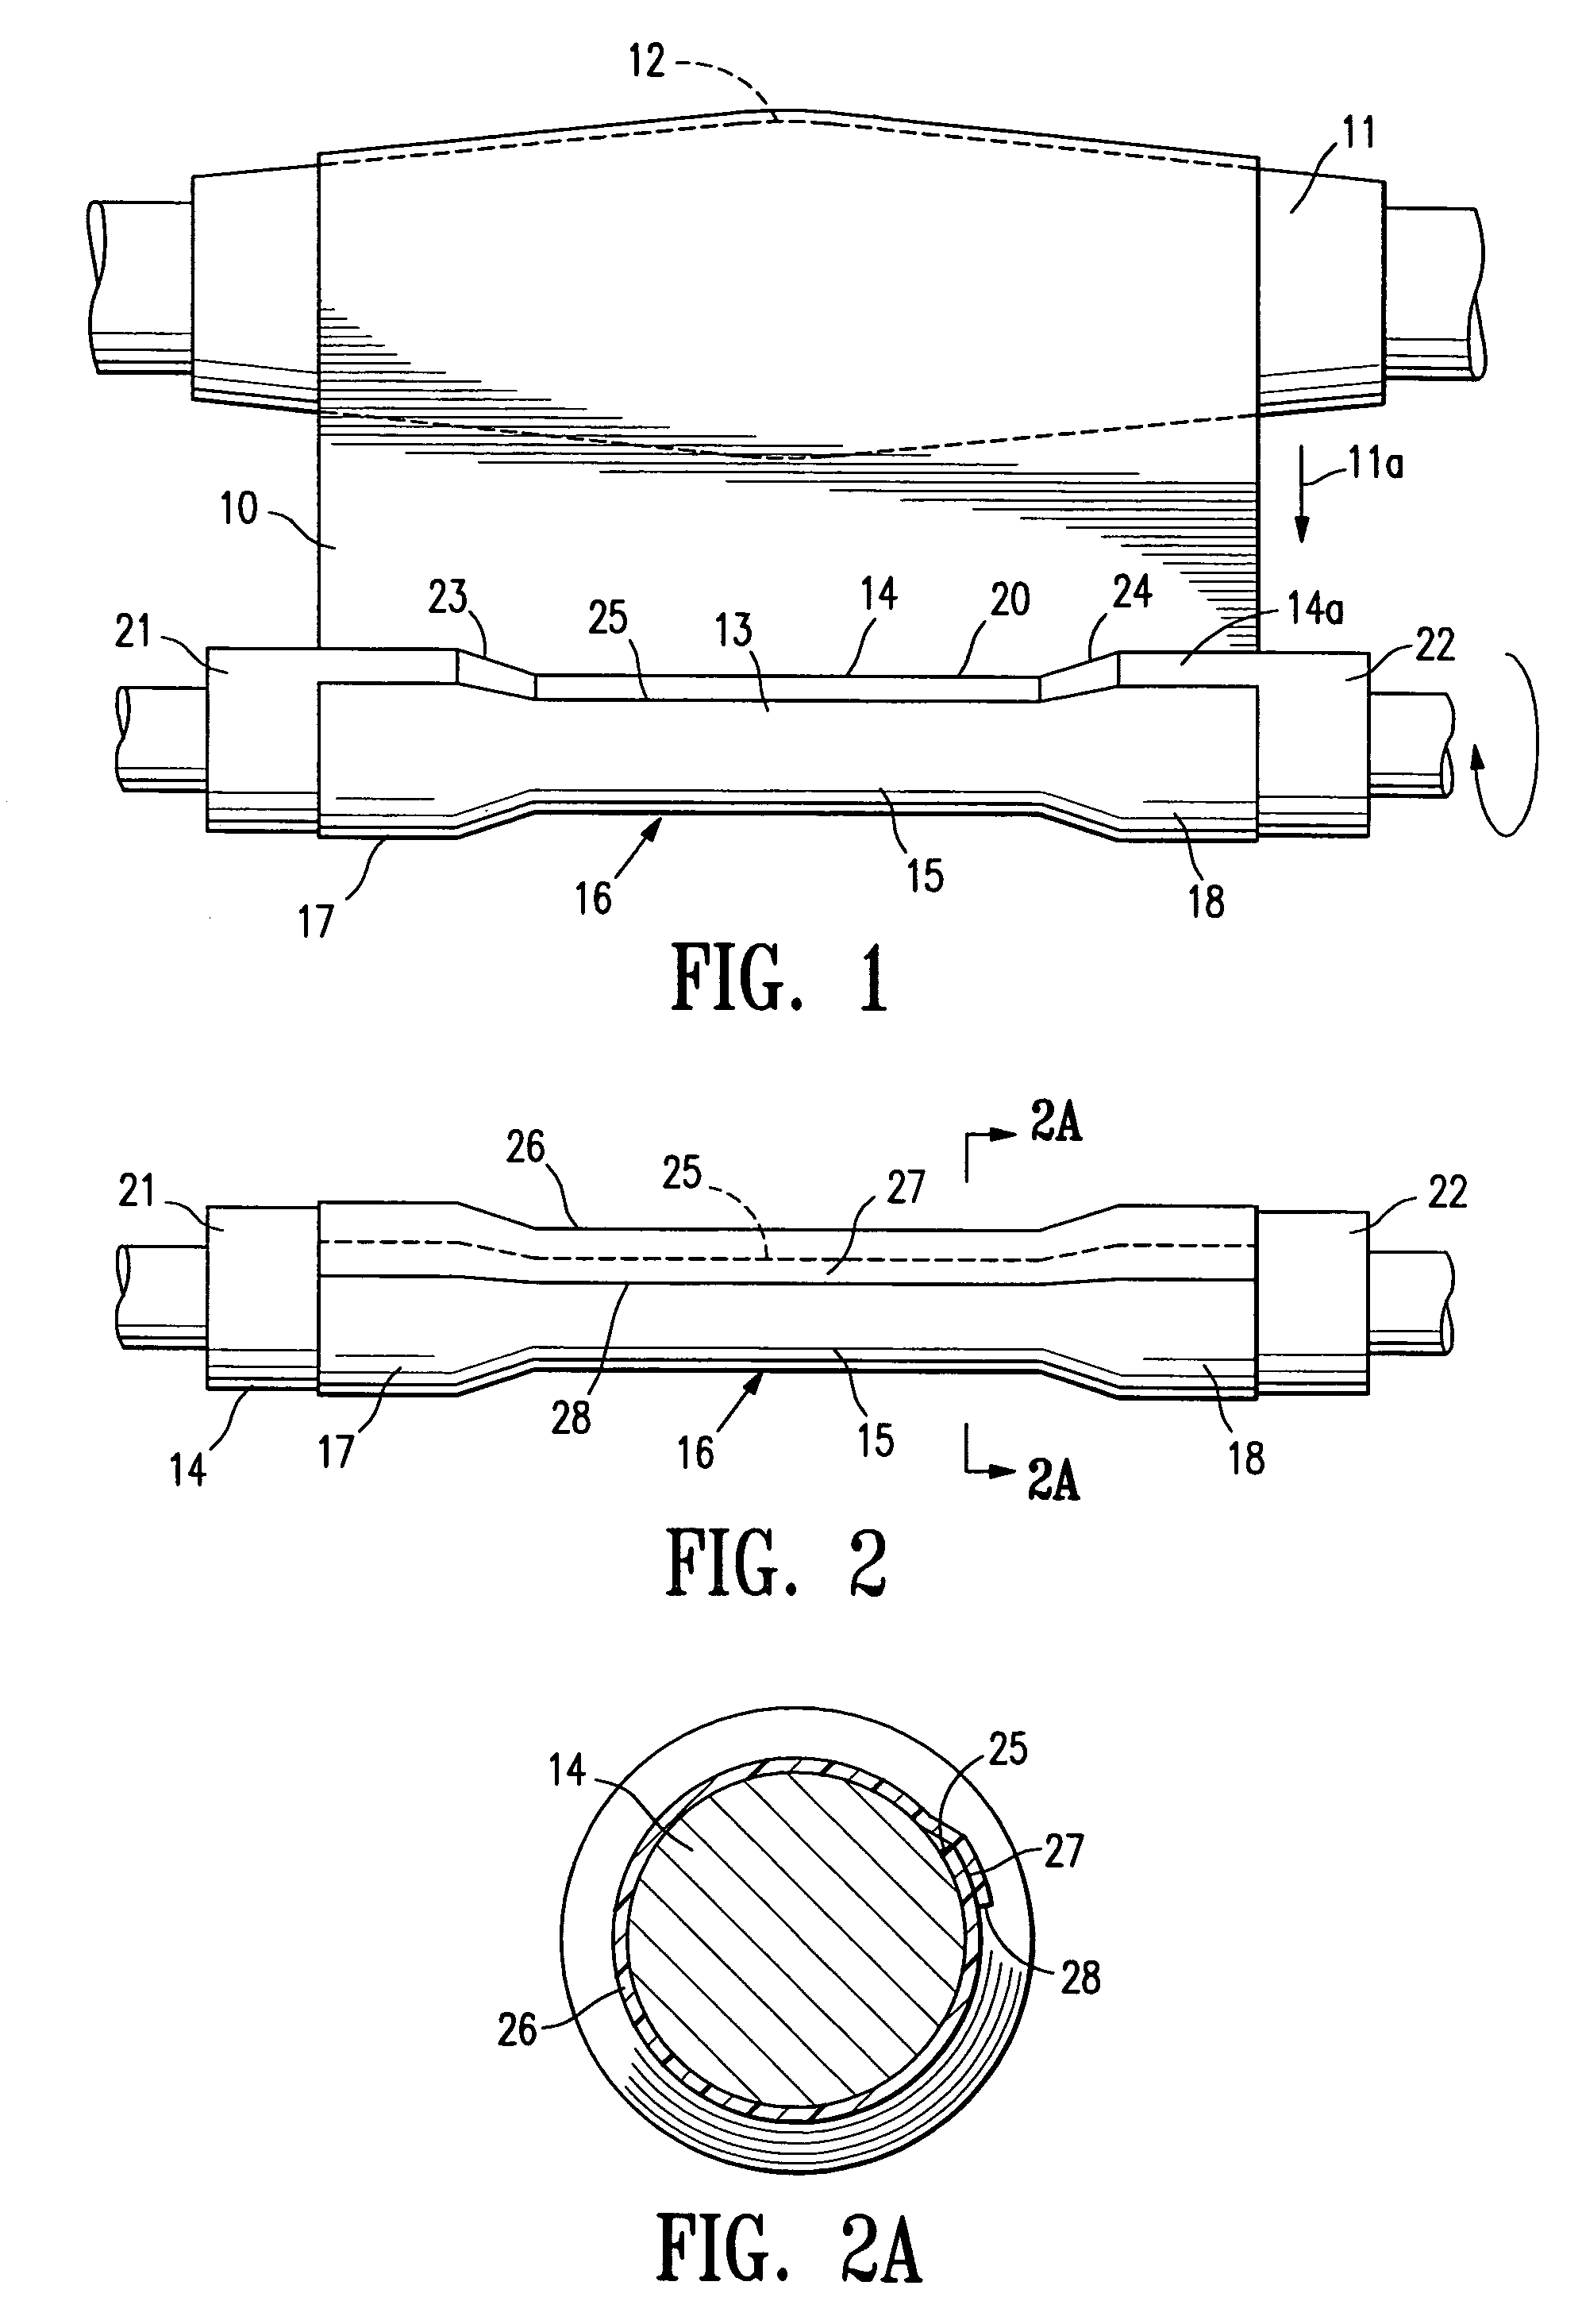 Method for manufacturing an endovascular graft section